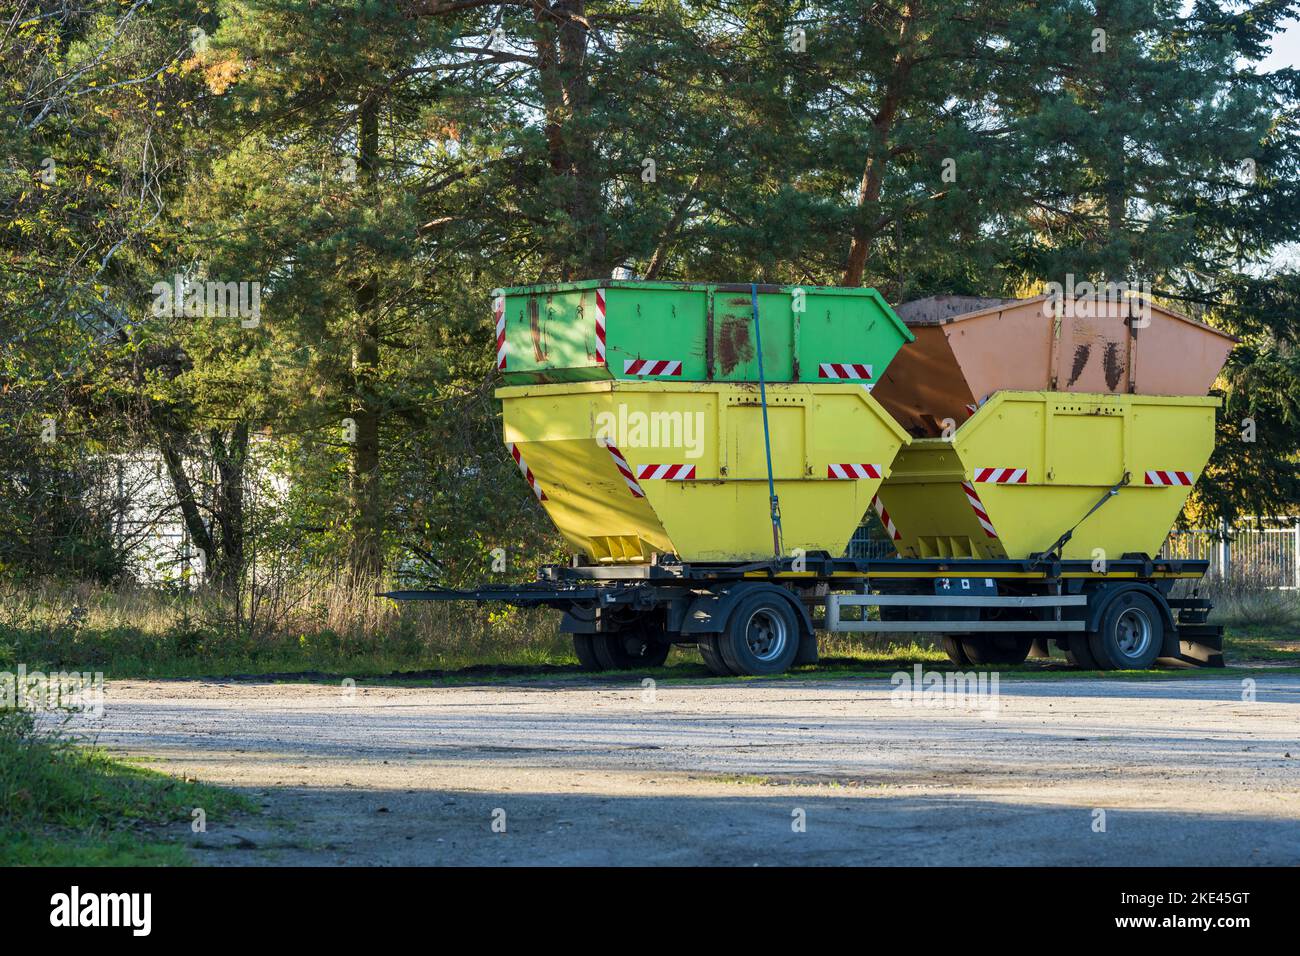 Debris container on a trailer of a truck Stock Photo